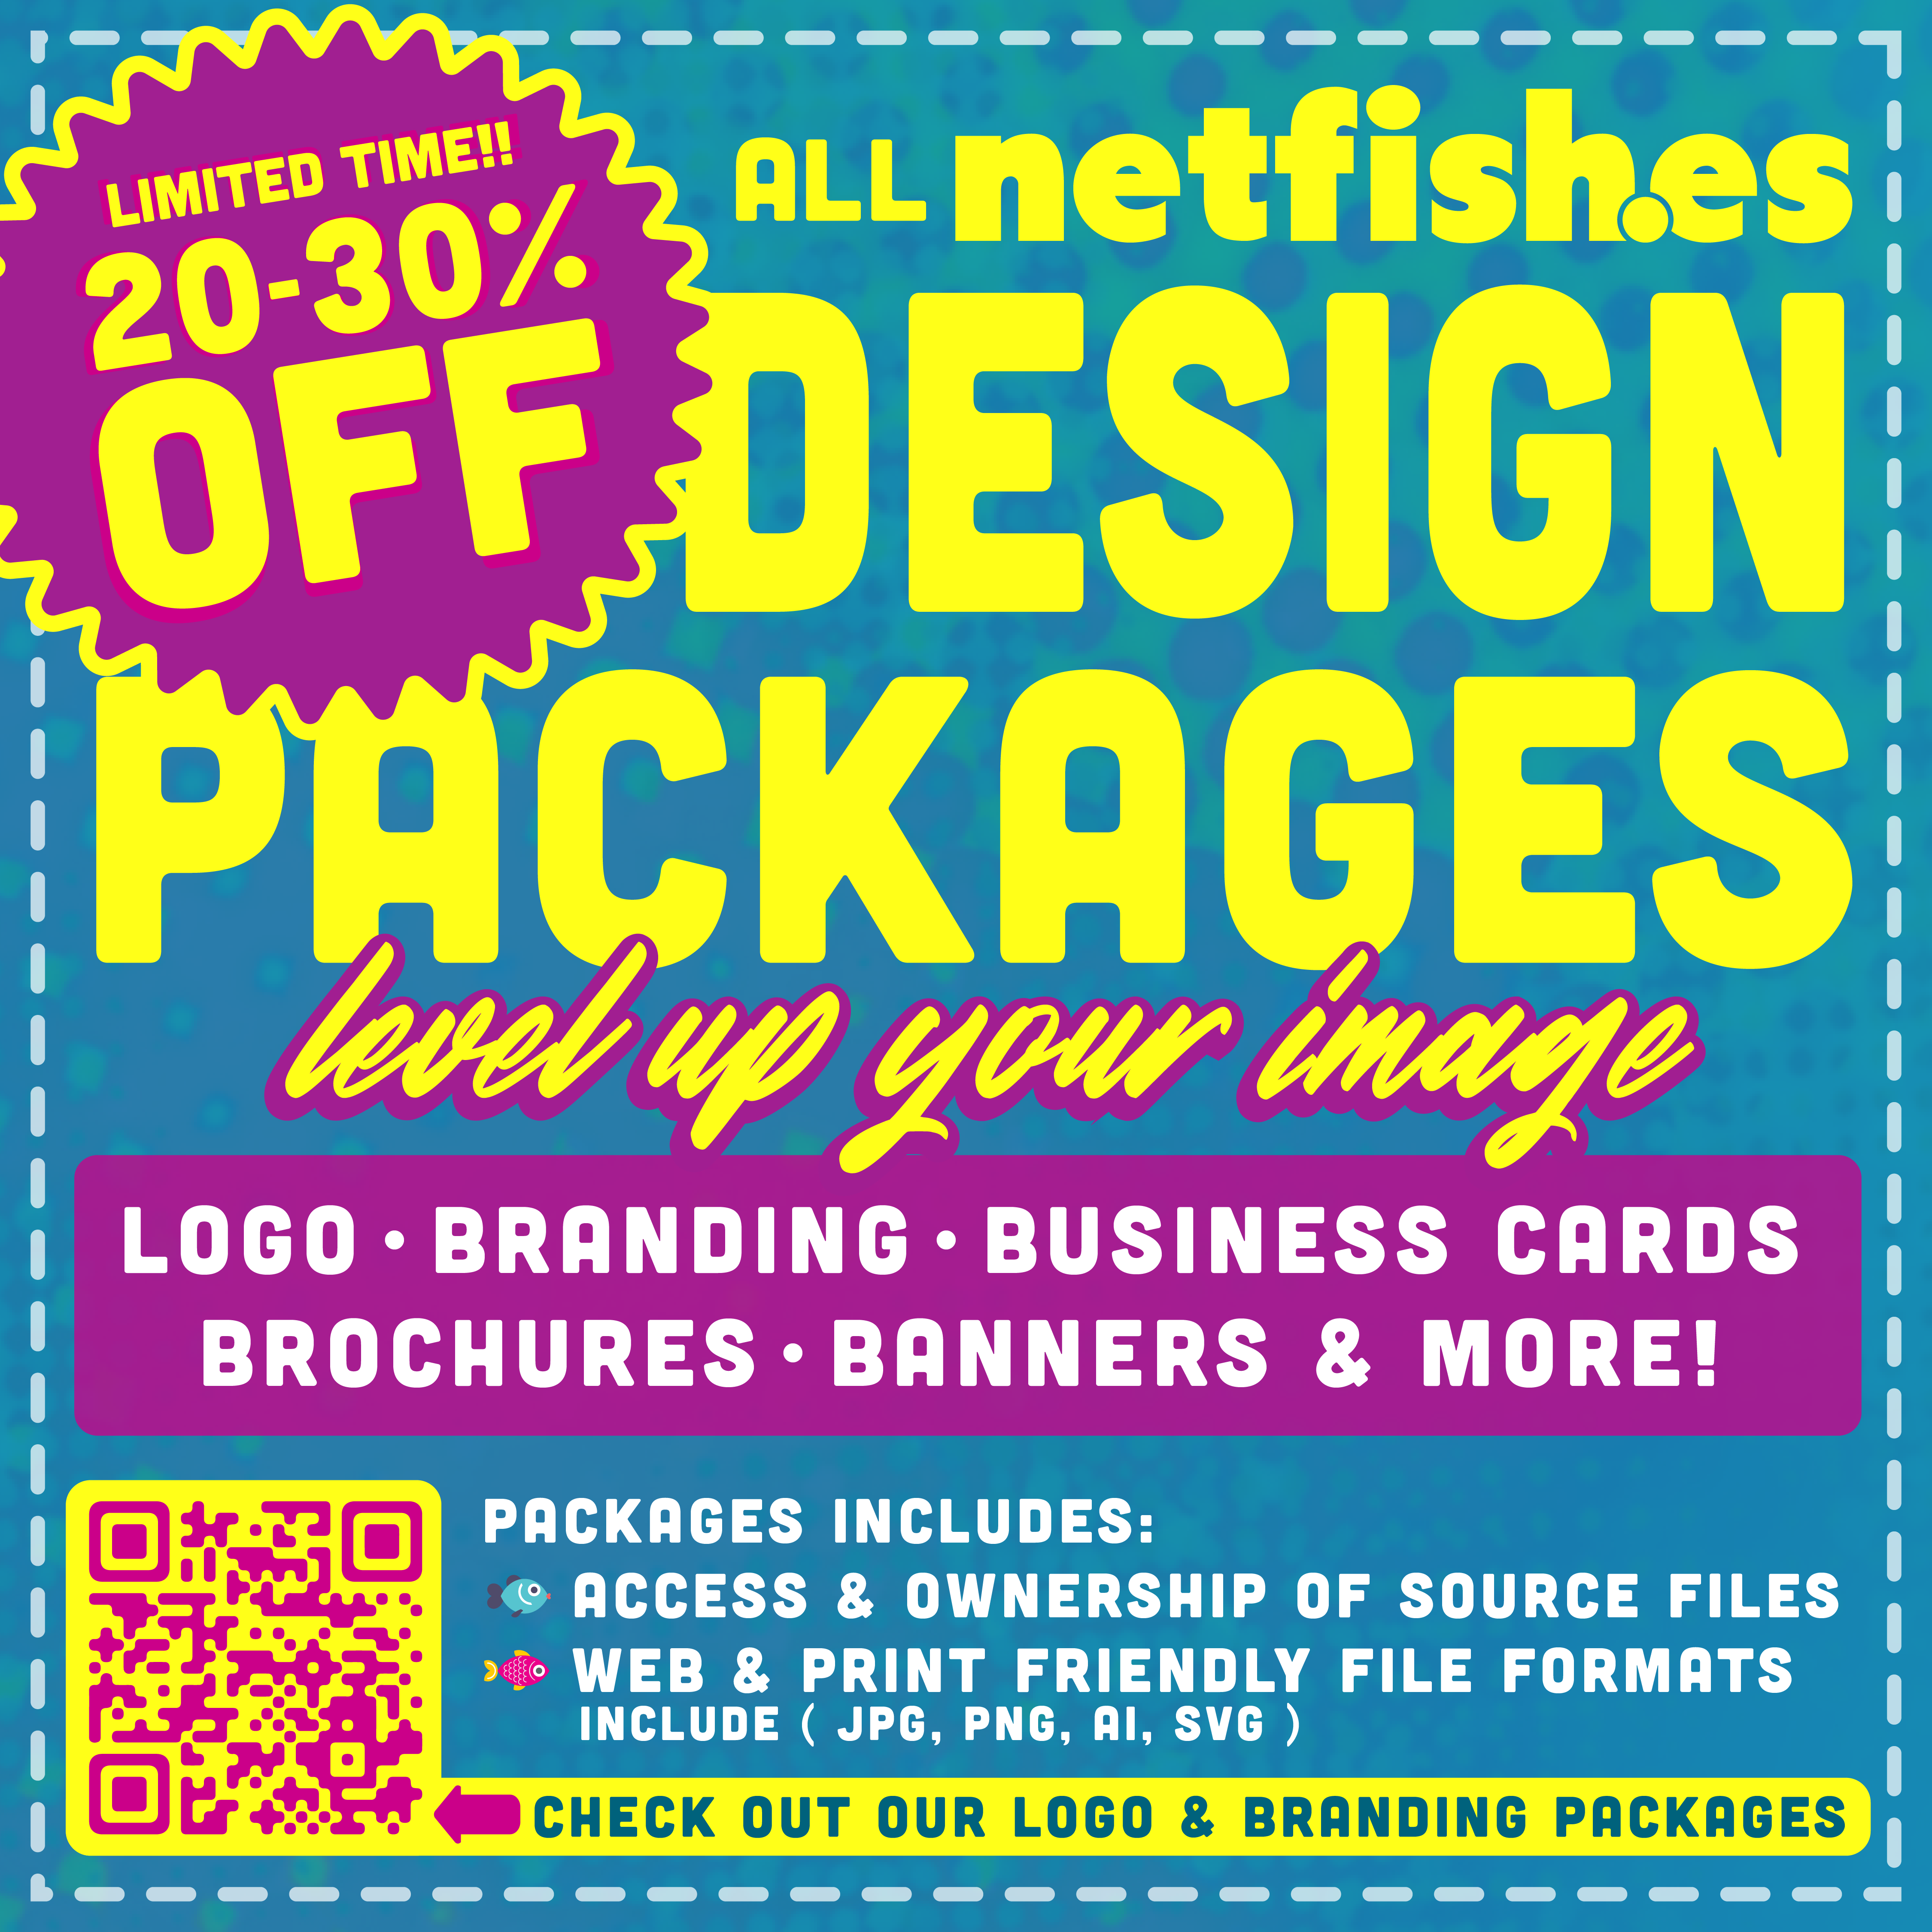 netfishes print ,limited time offer of $50 for 1,000 business cards with Free Shipping. For printing only, design services available for purchases.